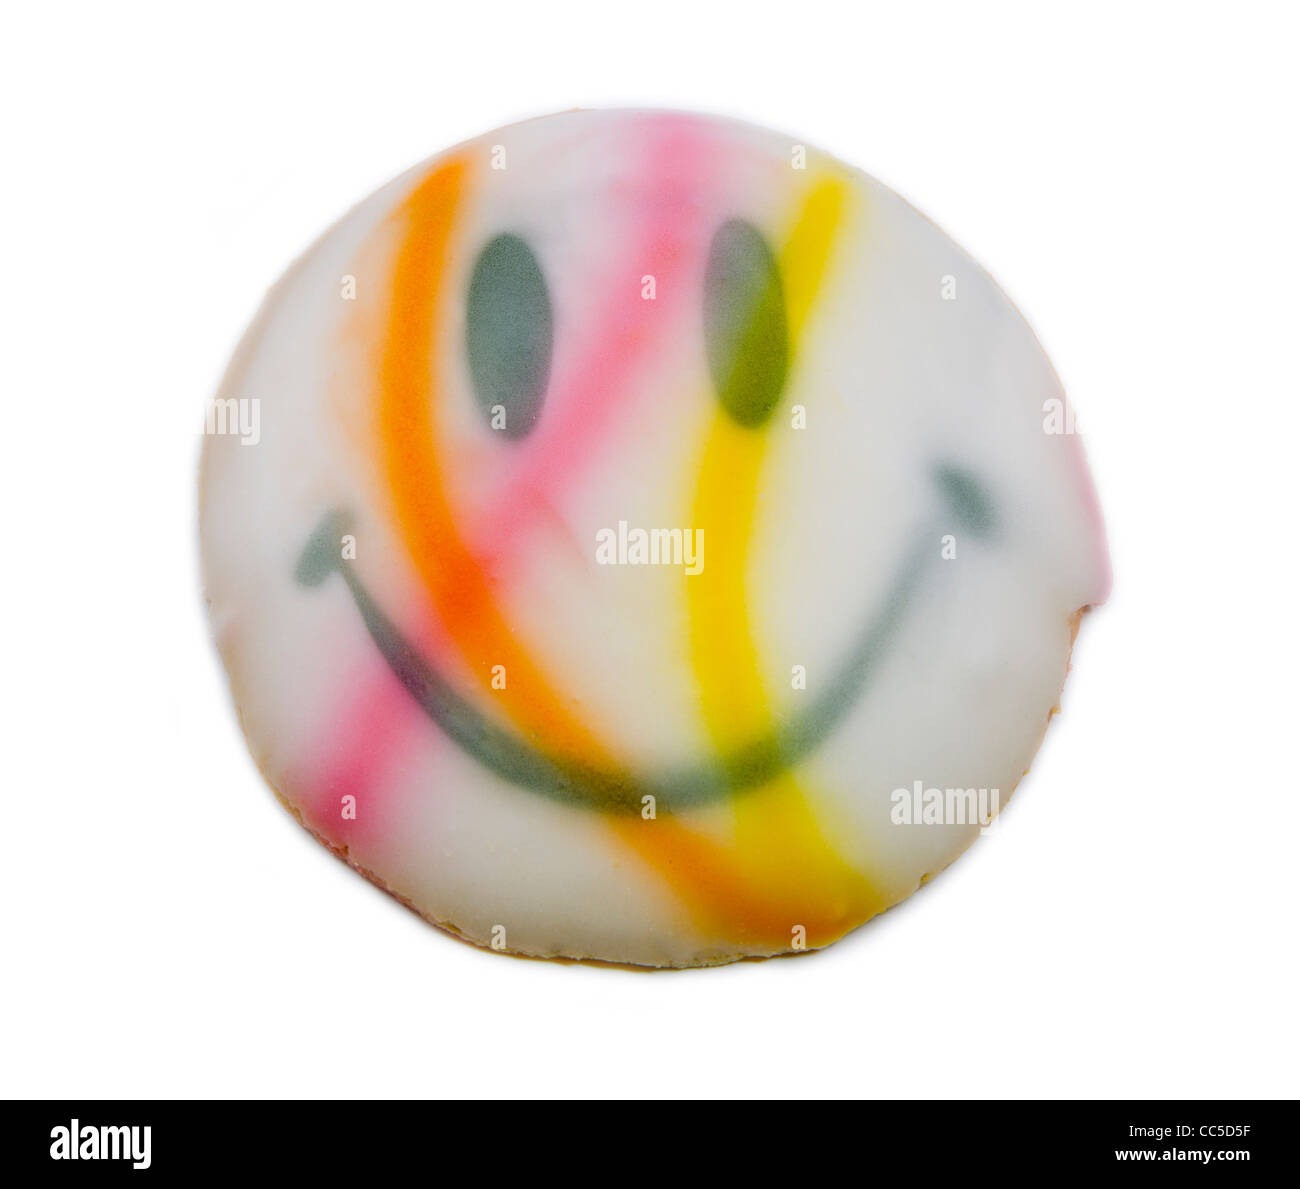 A colorful orange, white, yellow, pink and white smiley face cookie fresh from the bakery. Stock Photo